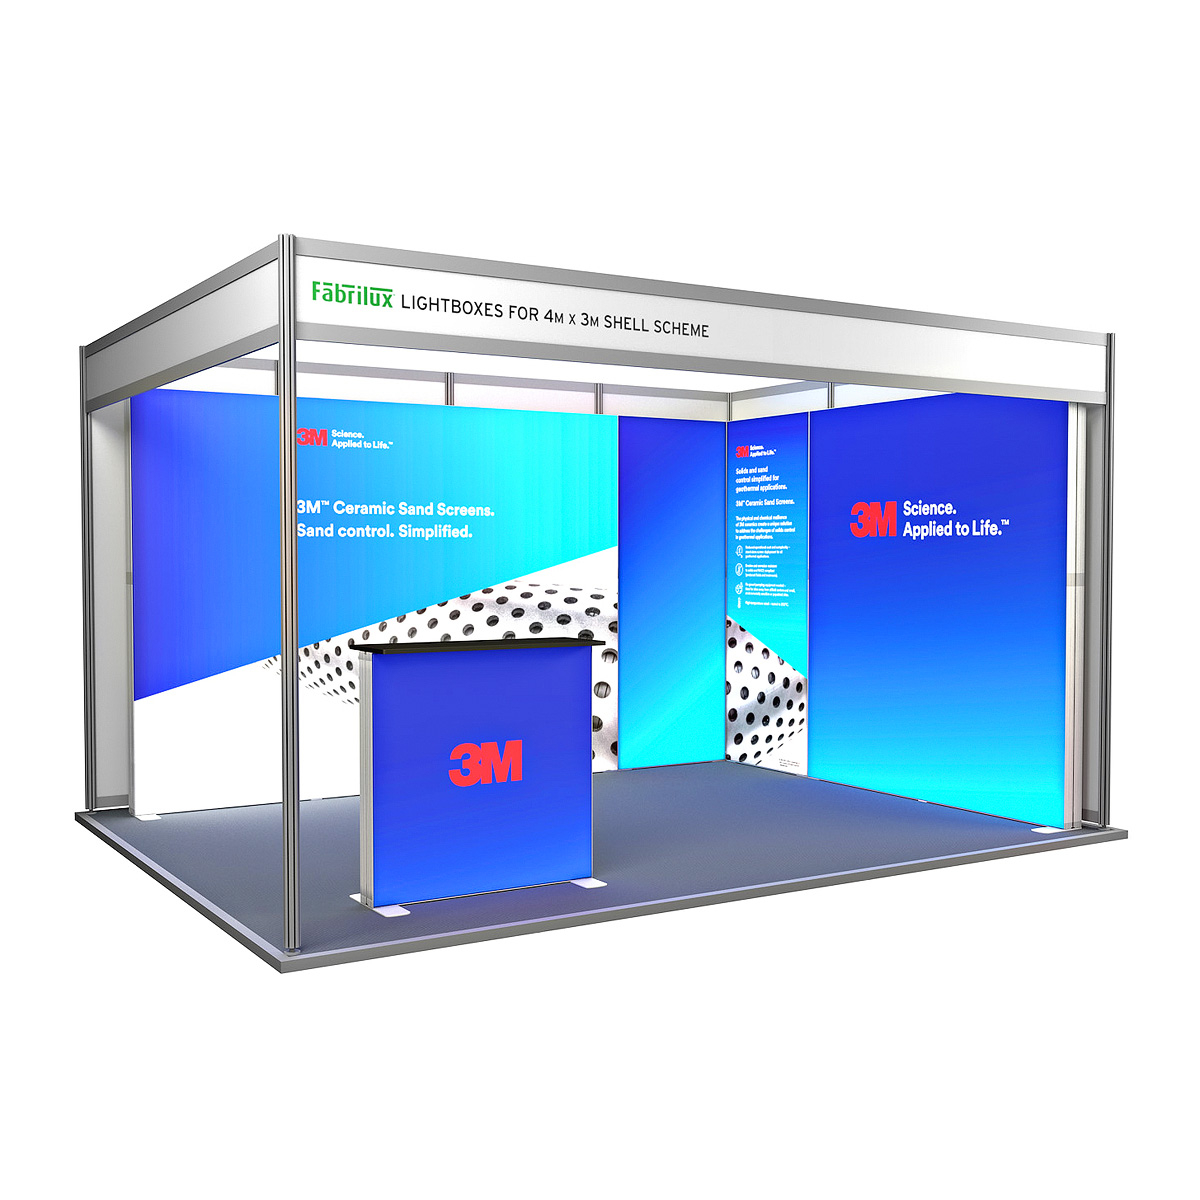 4m x 3m FABRILUX® LED Lightboxes Modular Exhibition Stand Shell Scheme